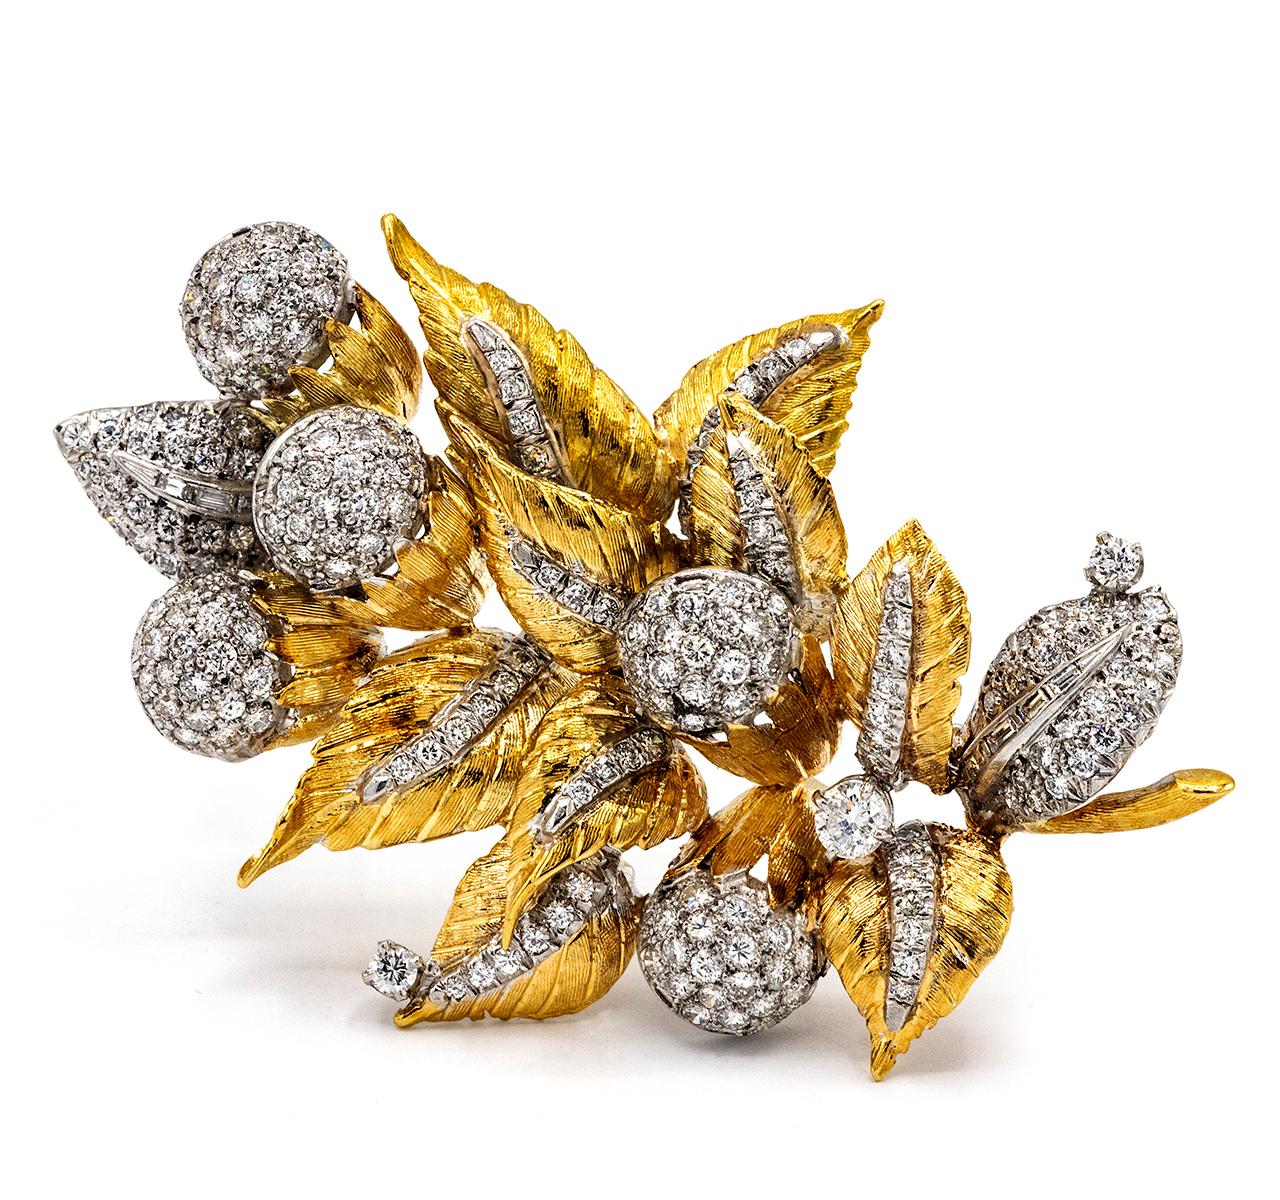 1970's Platinum & 18K Yellow Gold Foliage Round & Baguette Cut Brooch.

Add a touch of foliage to your simple blouse or jacket all year round! This stunning vintage sparkling leaf pin features 12 ct. t.w. round brilliant-cut and diamond baguettes in